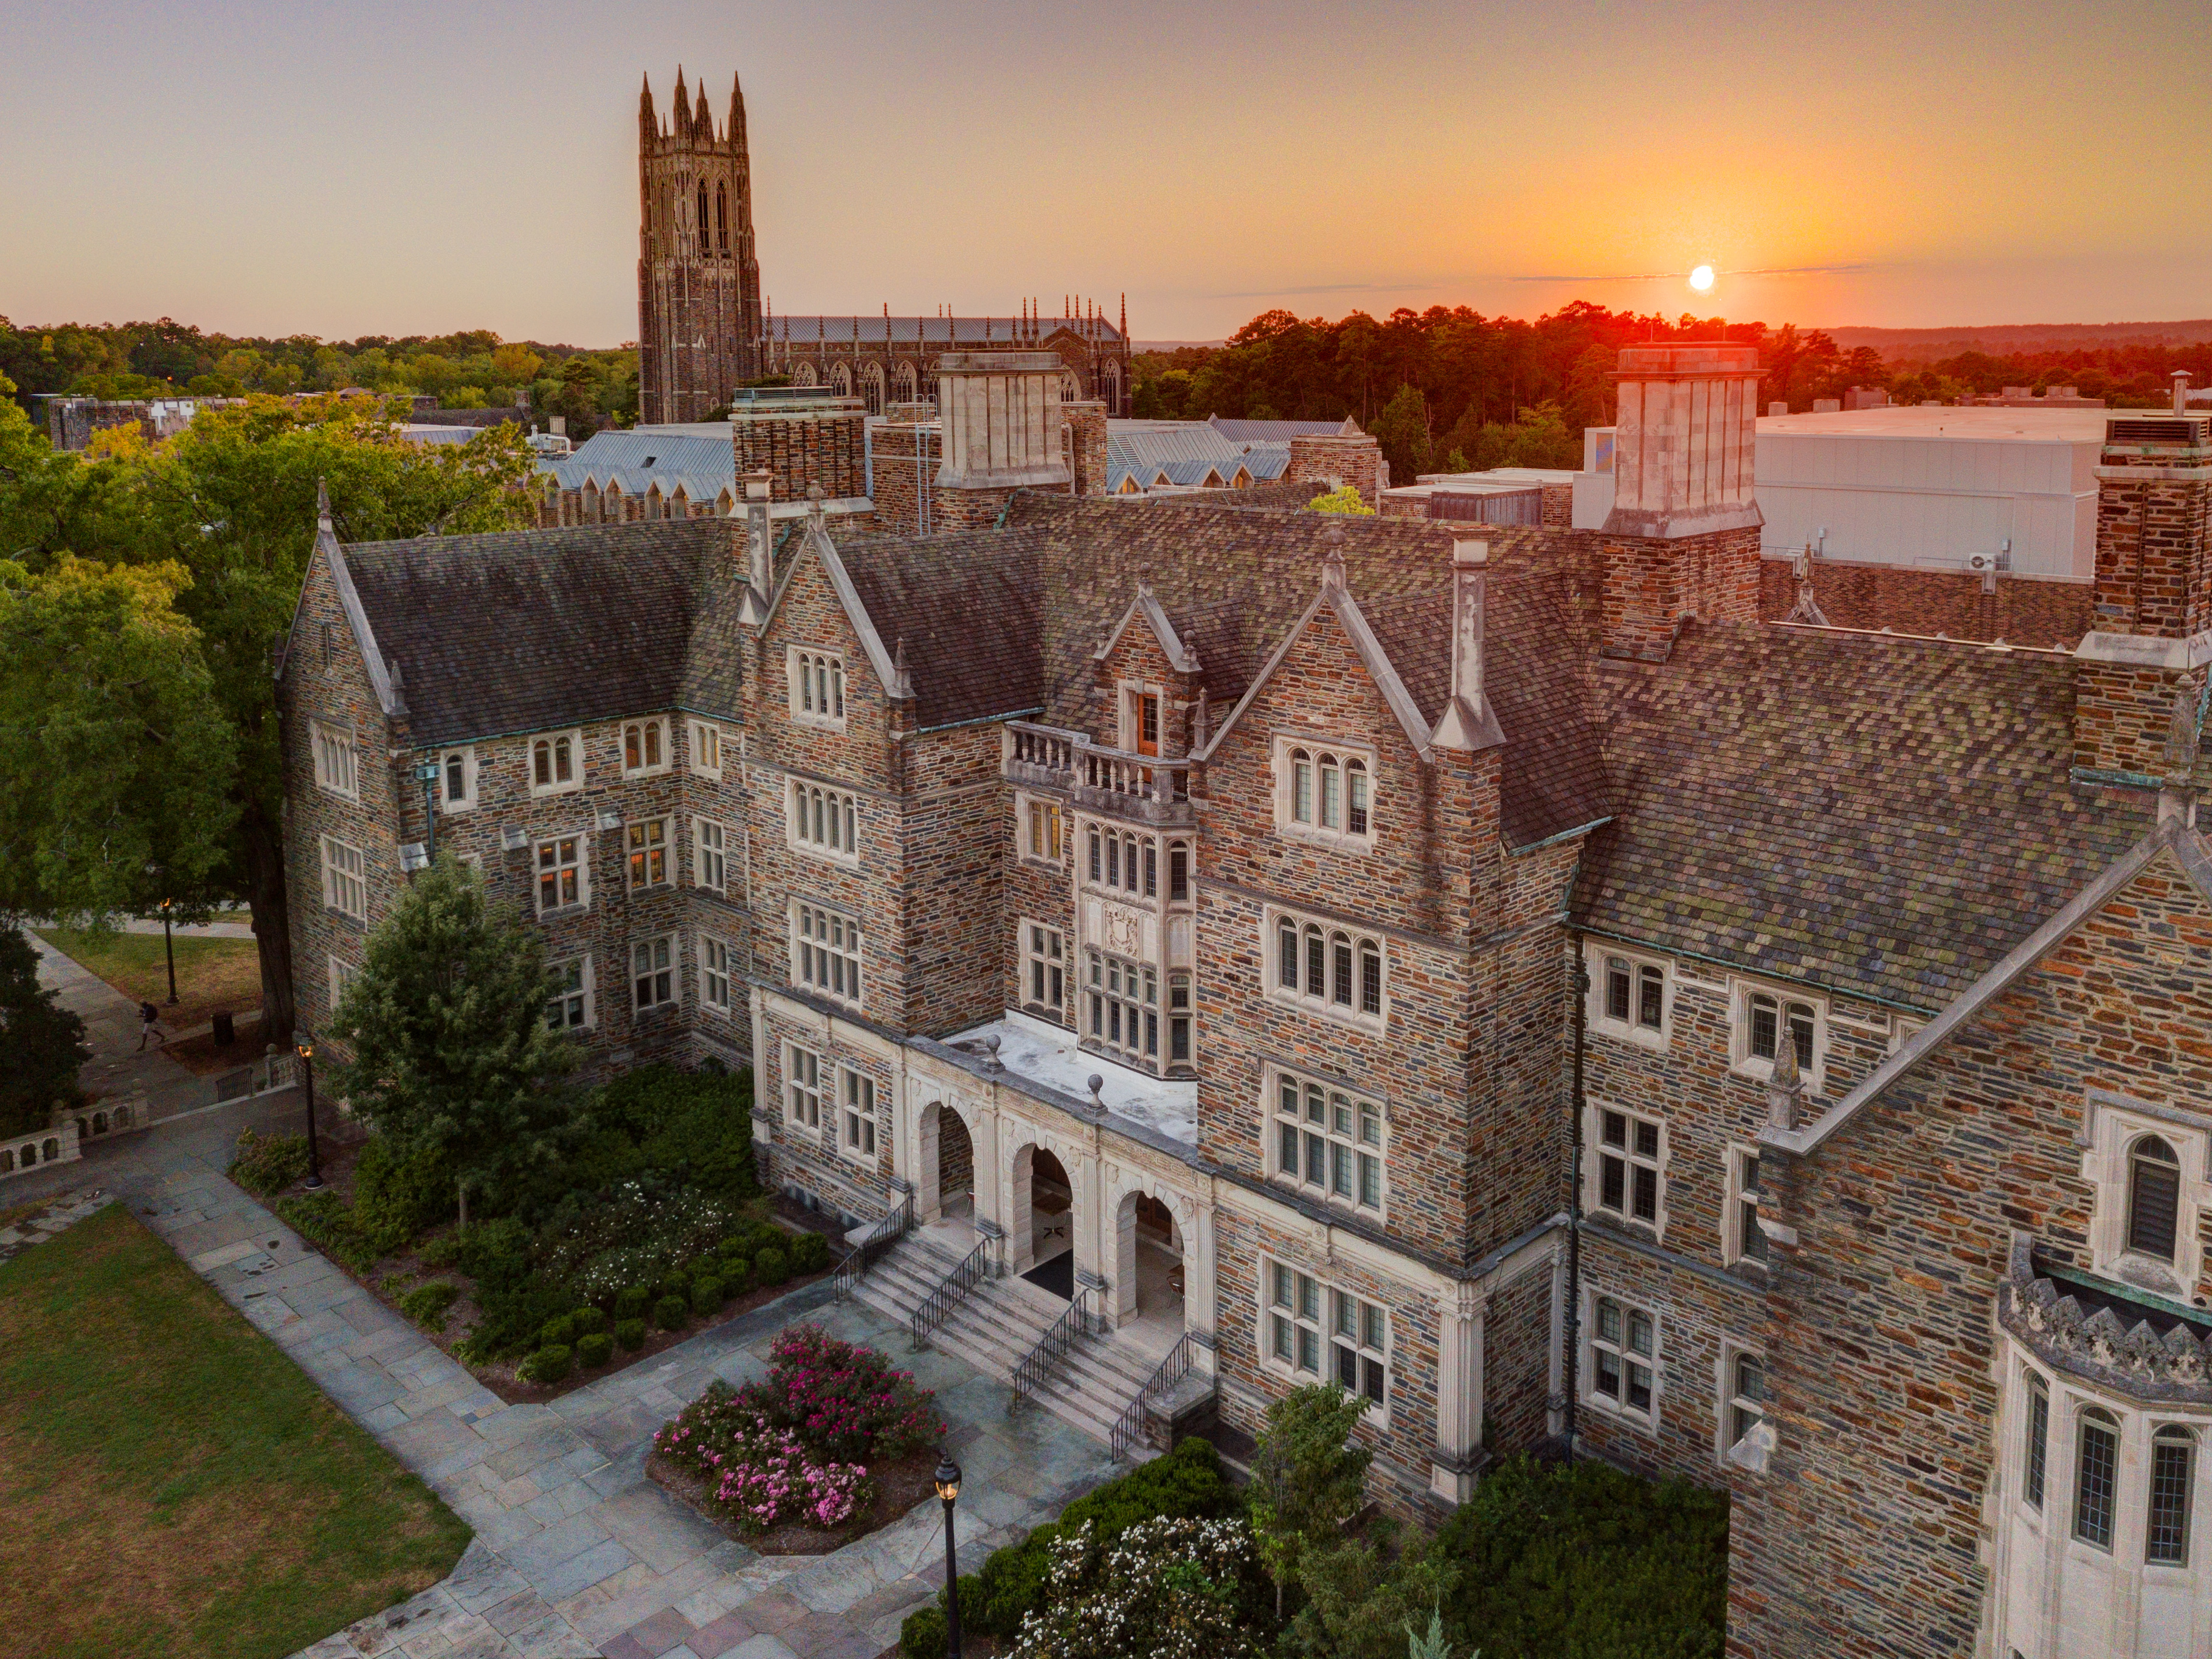 A picture of the sun setting over the Duke University chapel and other buildings on campus.